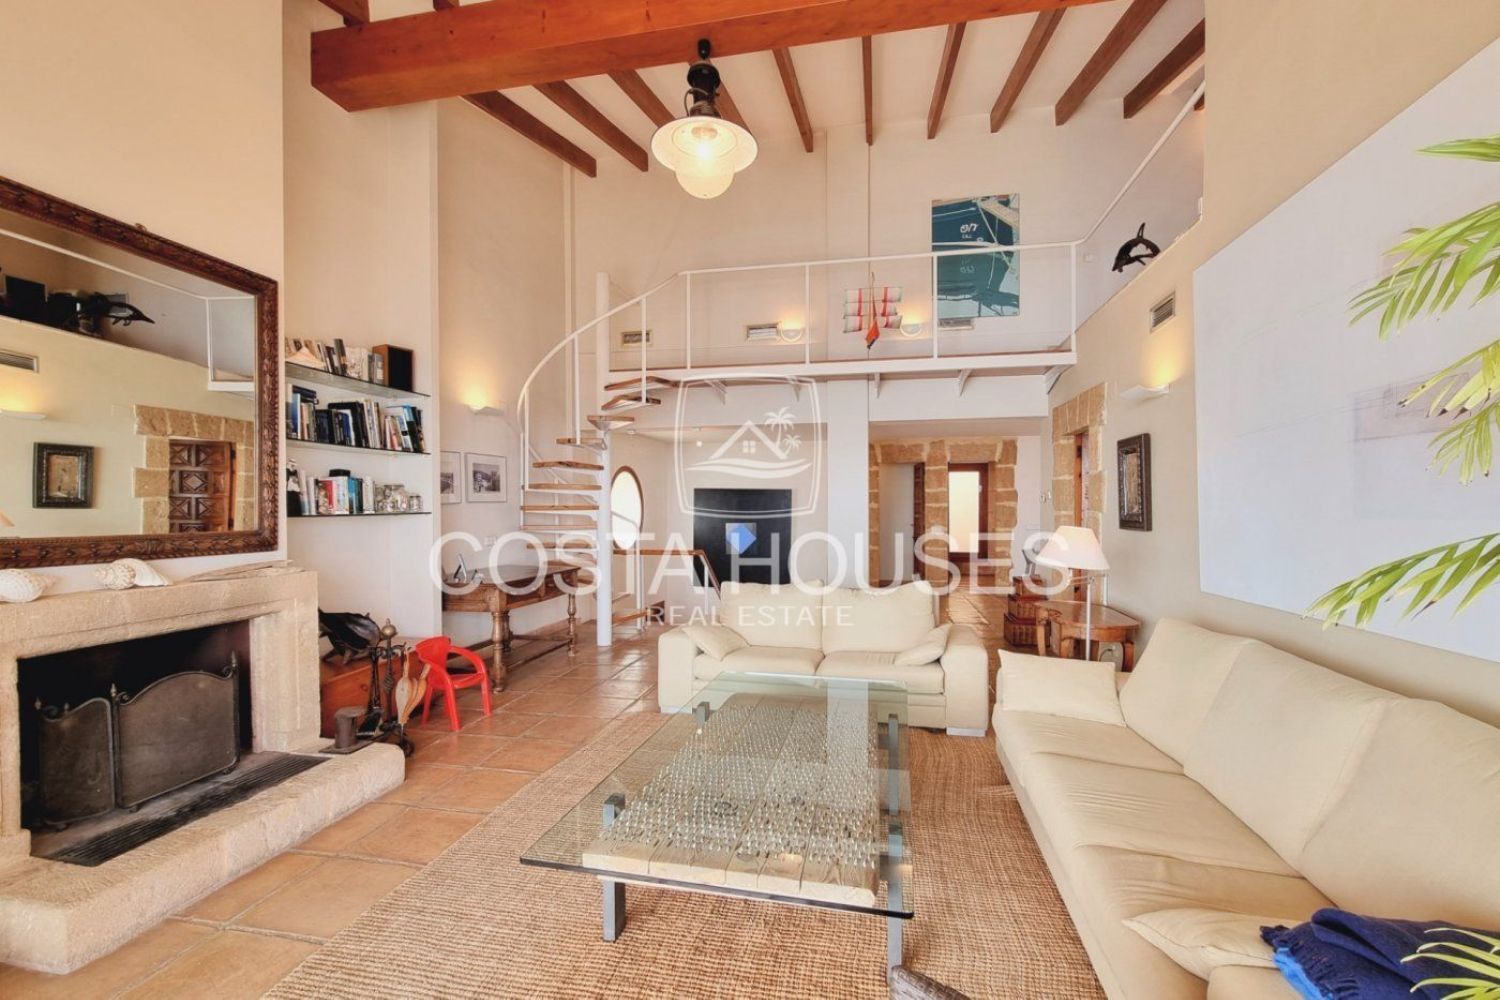 House for sale on the seafront on La Caleta street, in Jávea